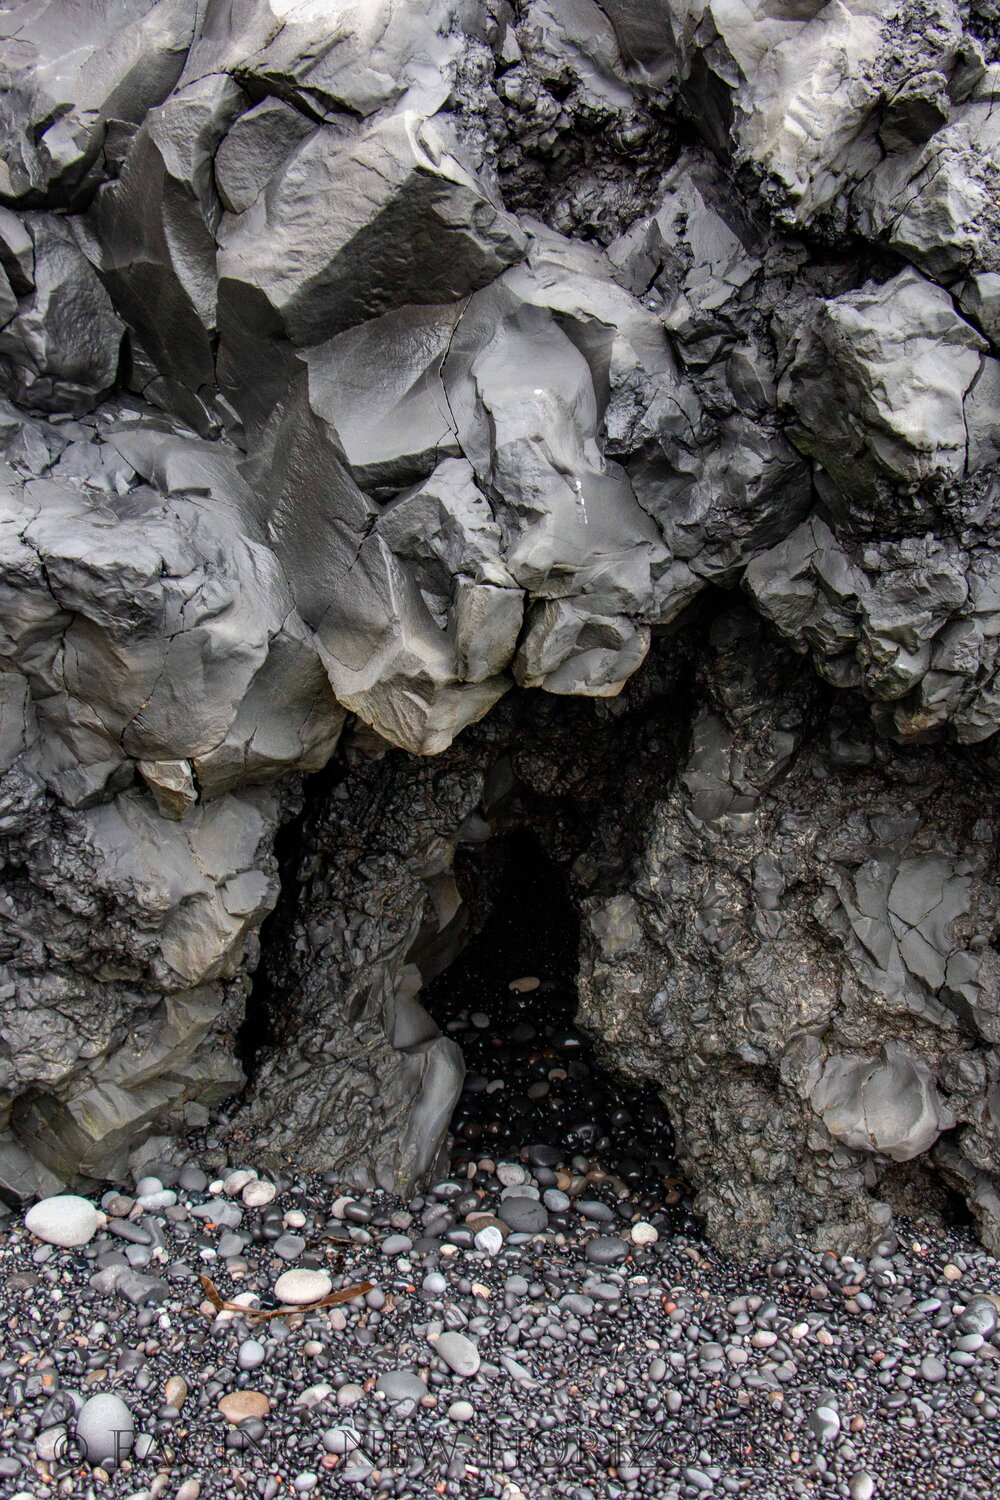  Small caves and tunnels in the rocks at Reynisfjara  